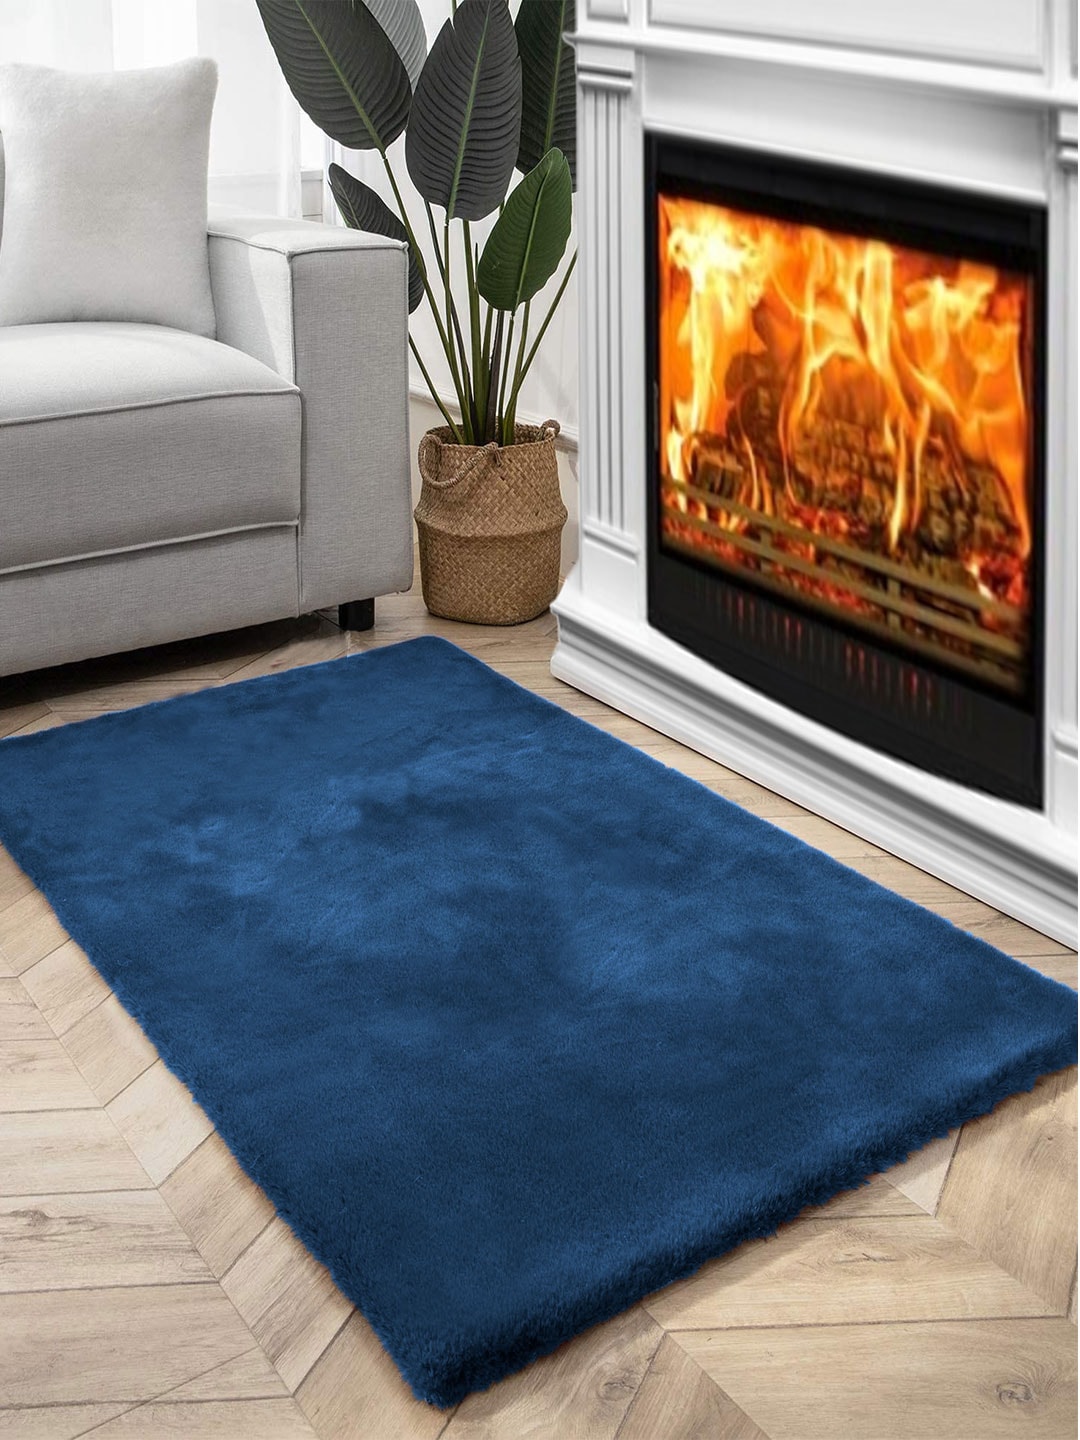 FI Teal Polycotton Solid Bath Rugs Price in India